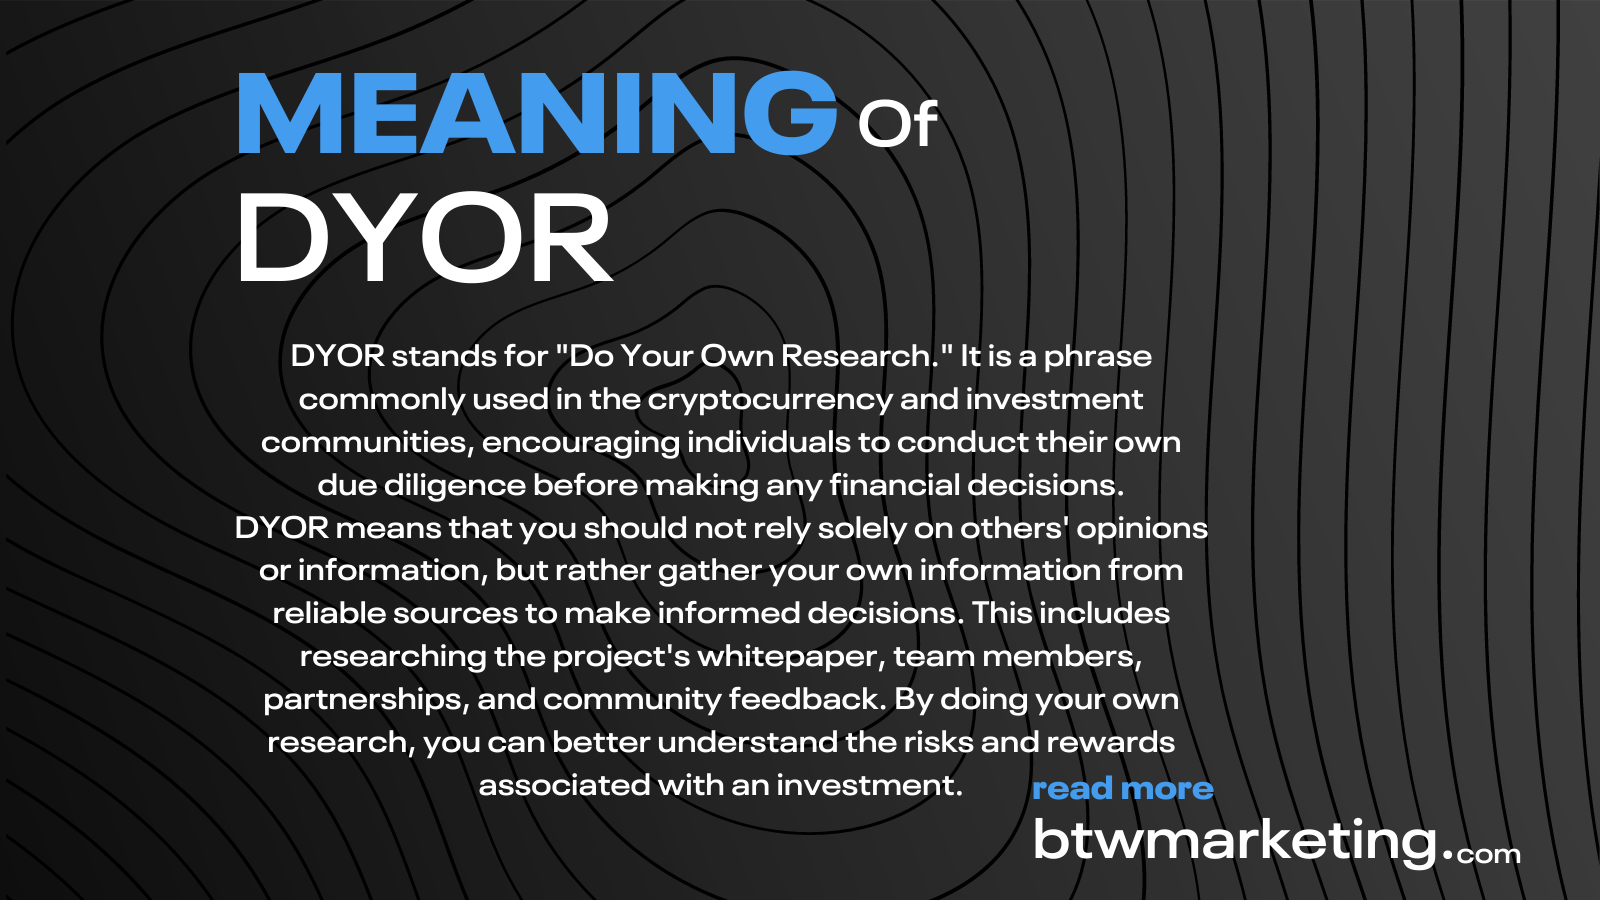 DYOR stands for "Do Your Own Research." It is a phrase commonly used in the cryptocurrency and investment communities, encouraging individuals to conduct their own due diligence before making any financial decisions